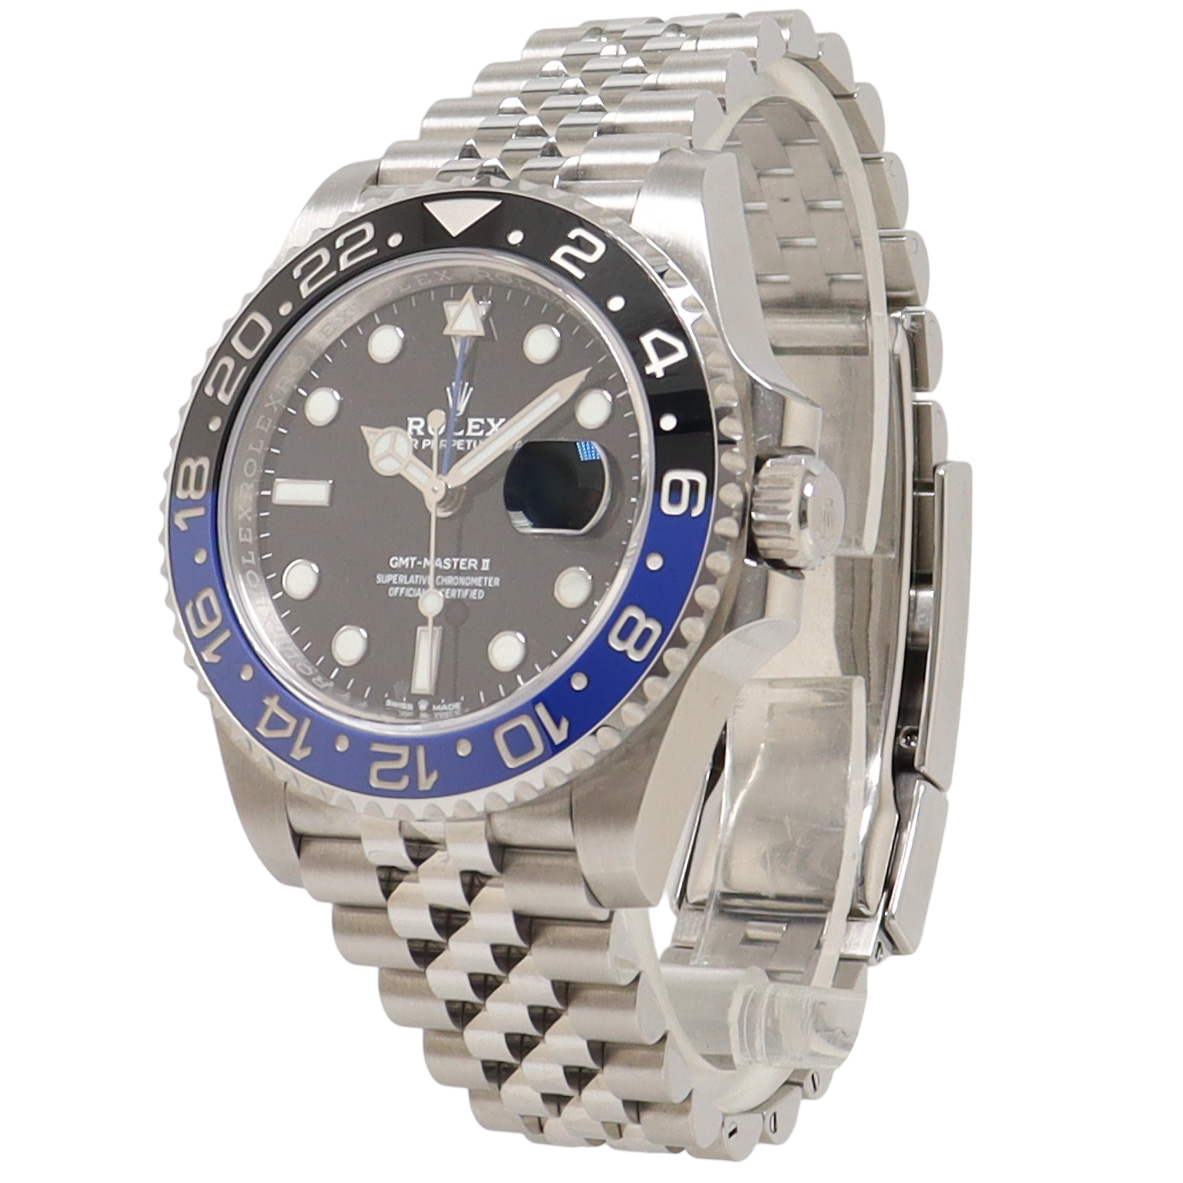 Rolex GMT Master II "Batgirl" Stainless Steel 40mm Black Dot Dial Watch Reference#: 126710BLNR